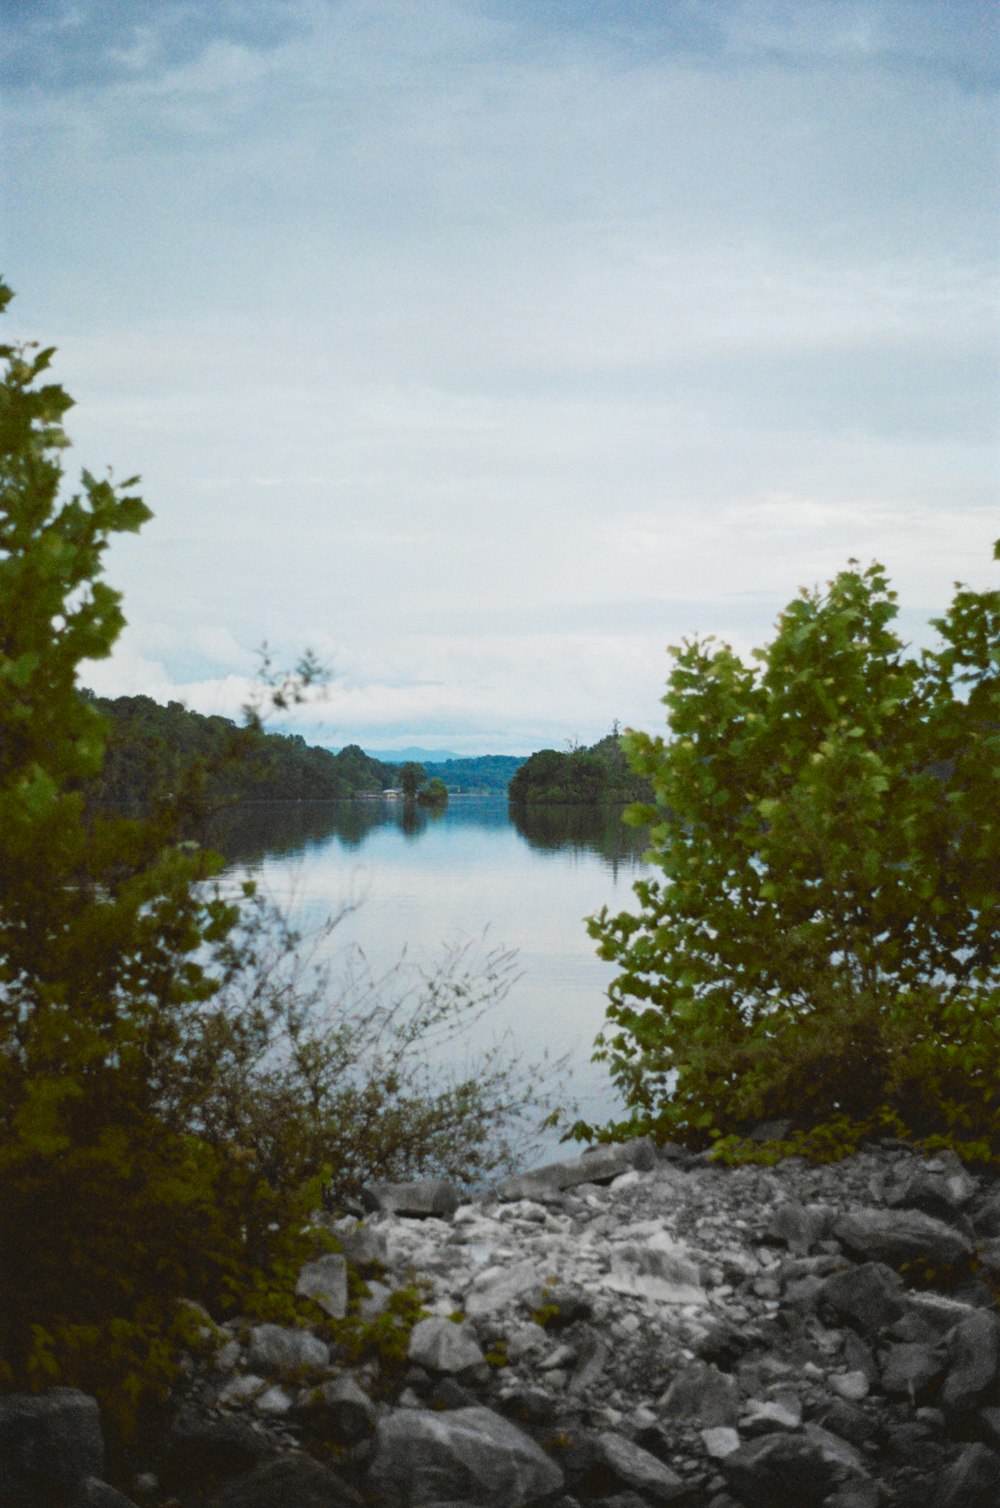 a view of a body of water surrounded by trees